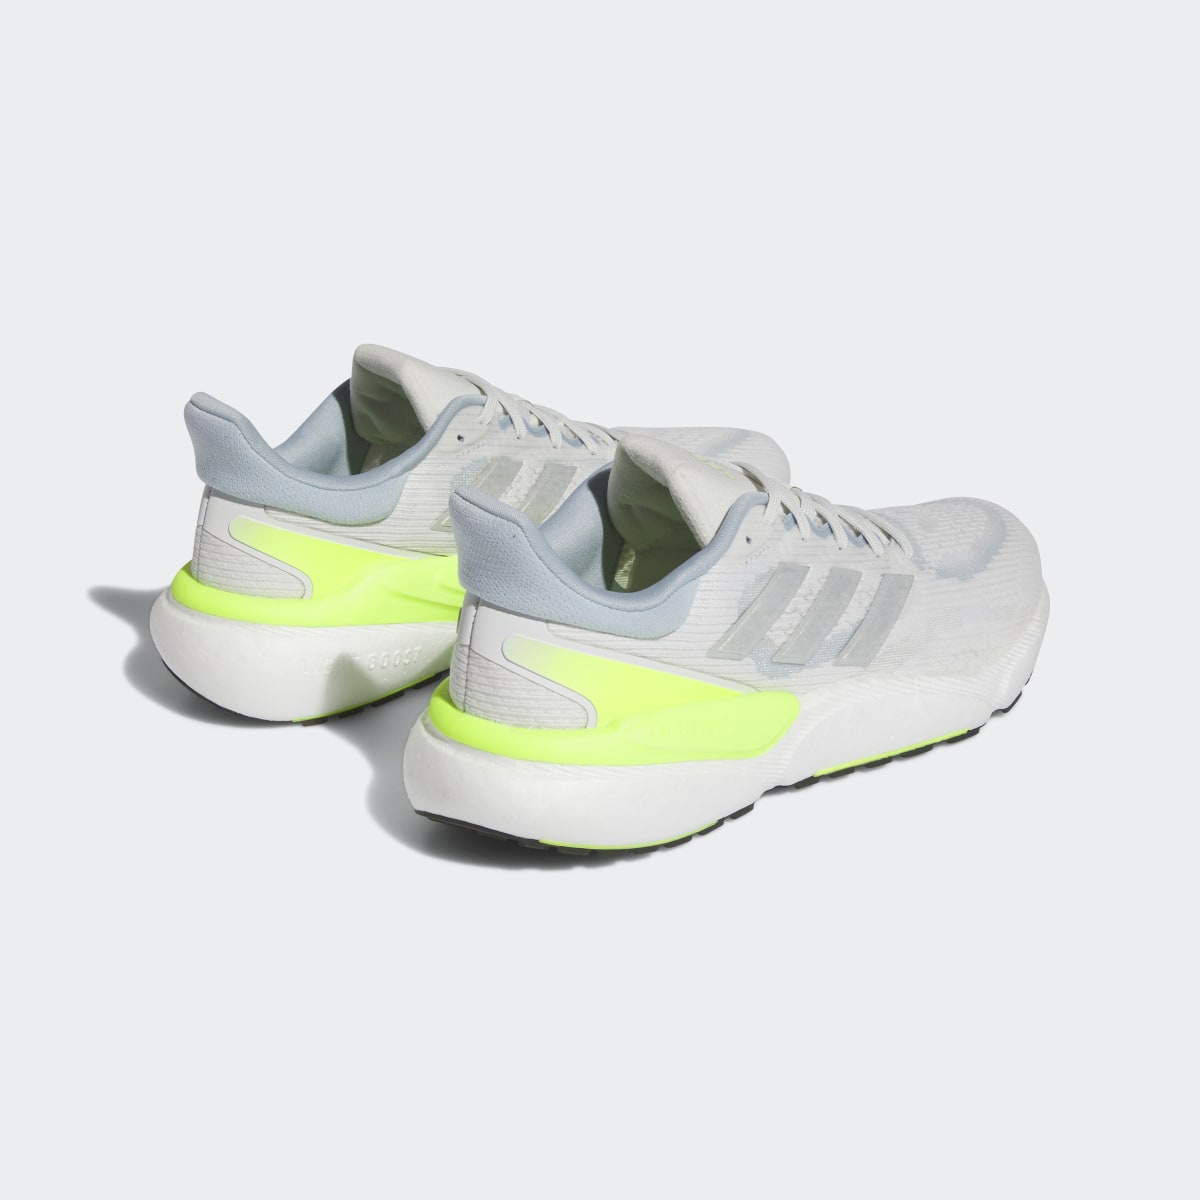 Adidas Solarboost 5 Shoes. 9